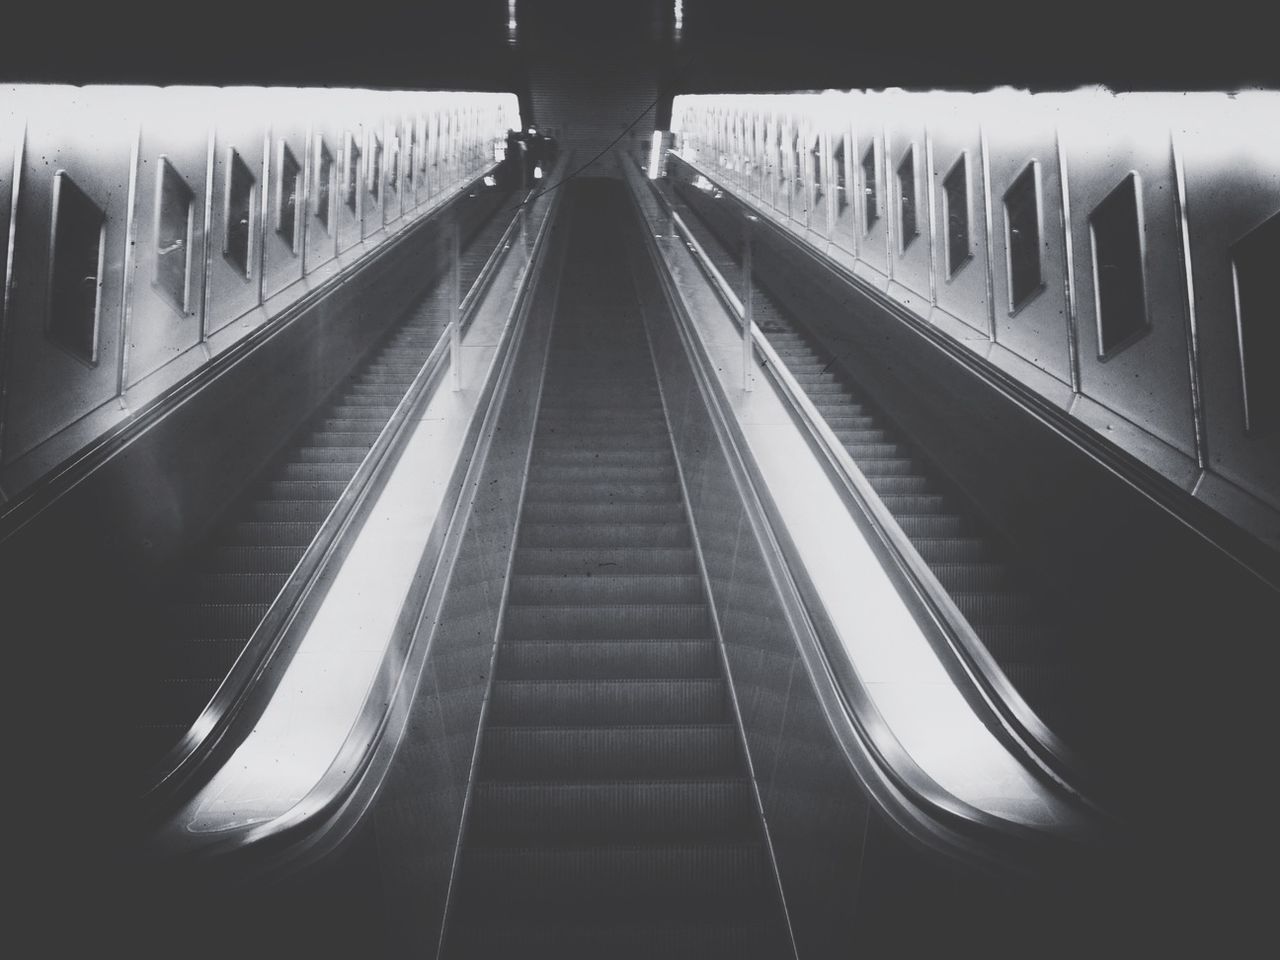 Low angle view of escalator in subway